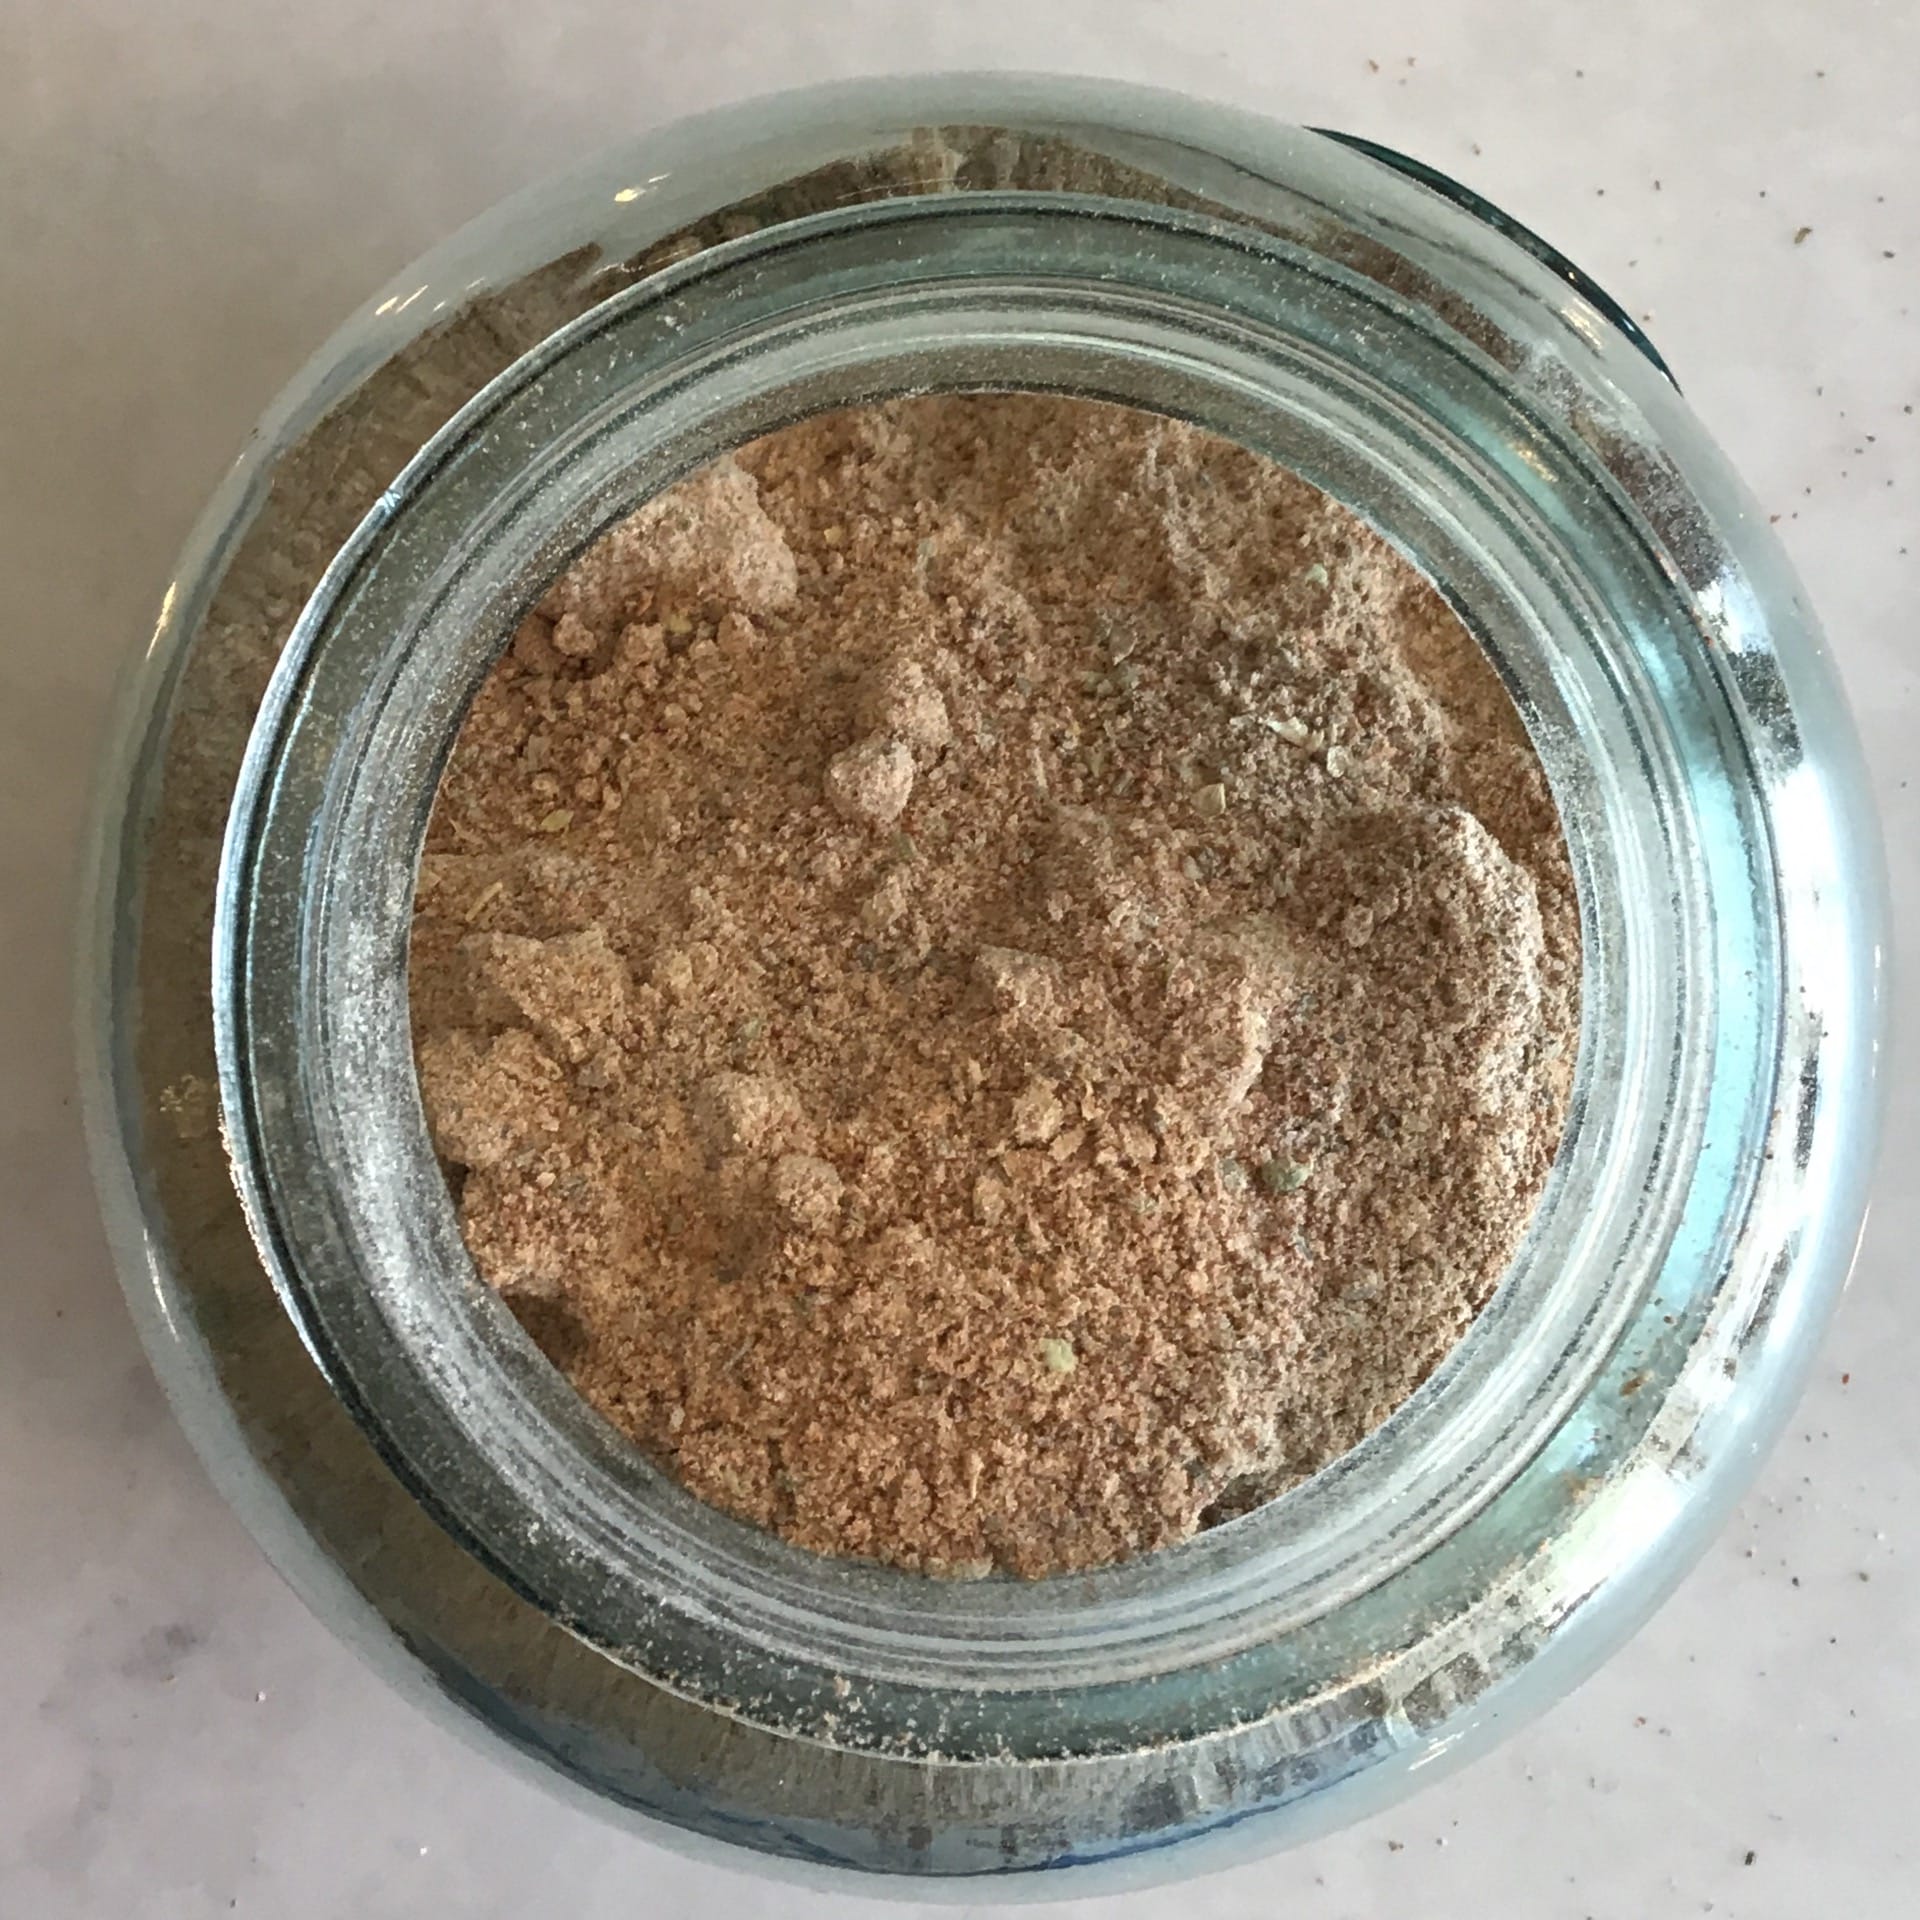 Zero Waste Refillable Taco Seasoning blend - made in house